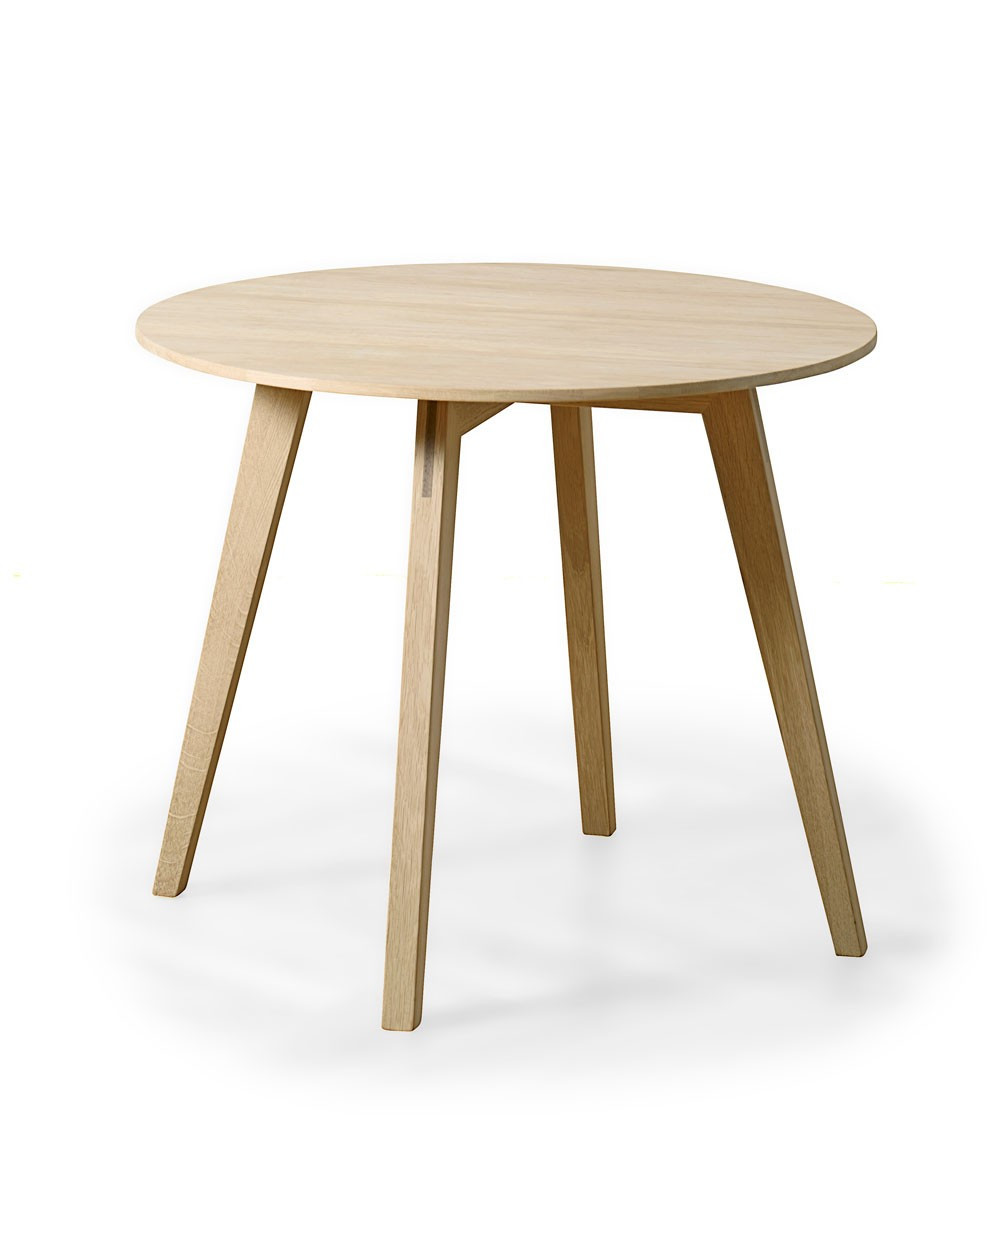 Circle Coffee Table Getama Blum And Balle, Small Round Lounge Table